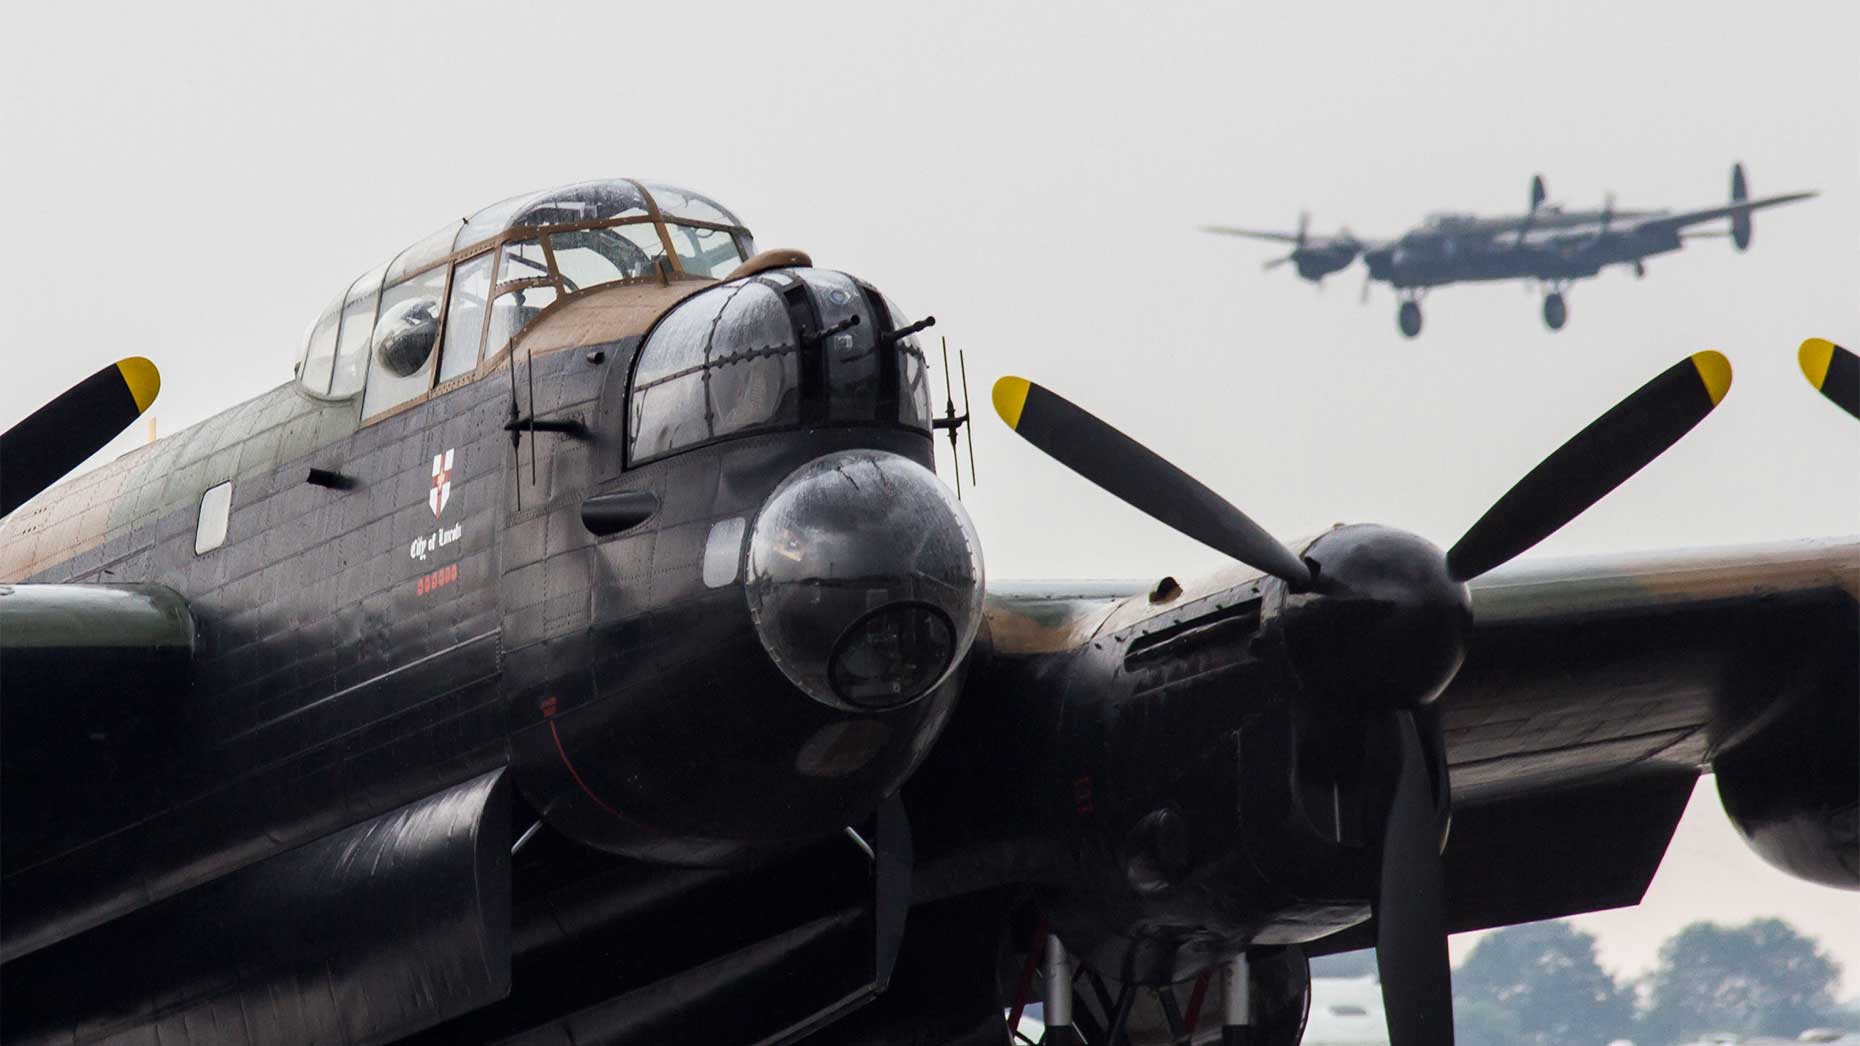 Thumper and Vera, the last two airworthy Lancasters. Photo: Sean Strange